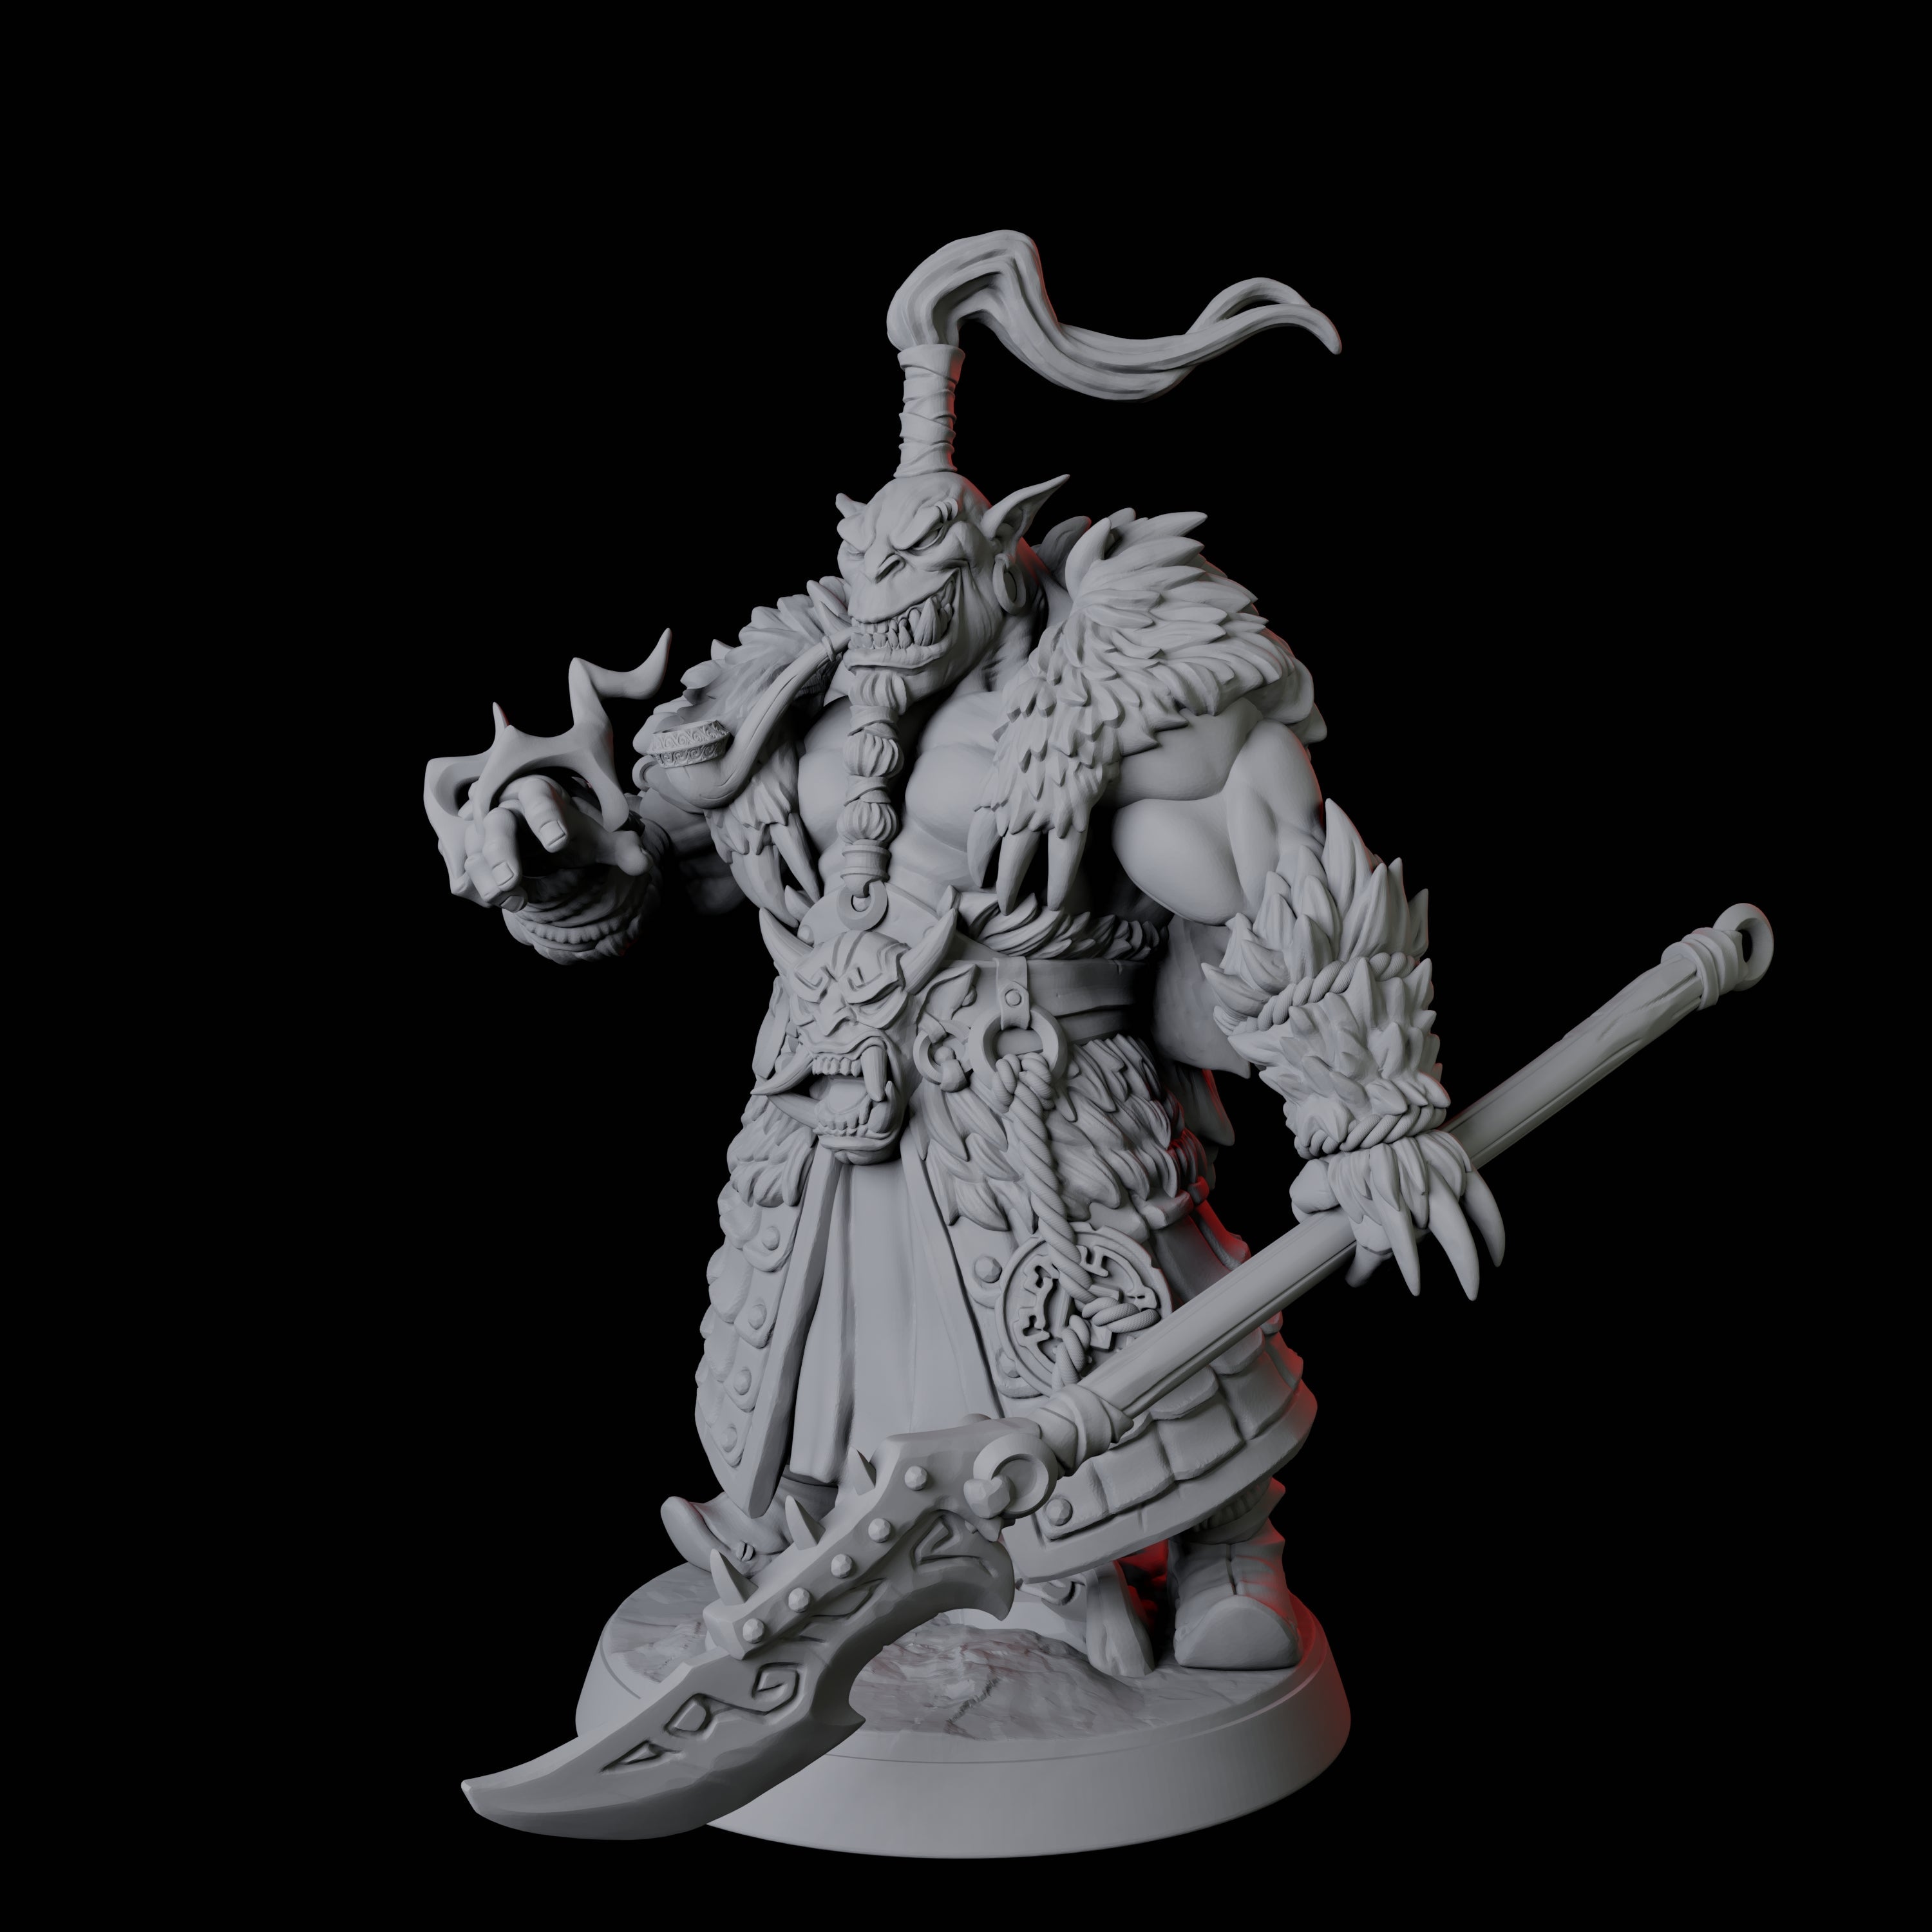 Mountain Orc Ranger Miniature for Dungeons and Dragons, Pathfinder or other TTRPGs